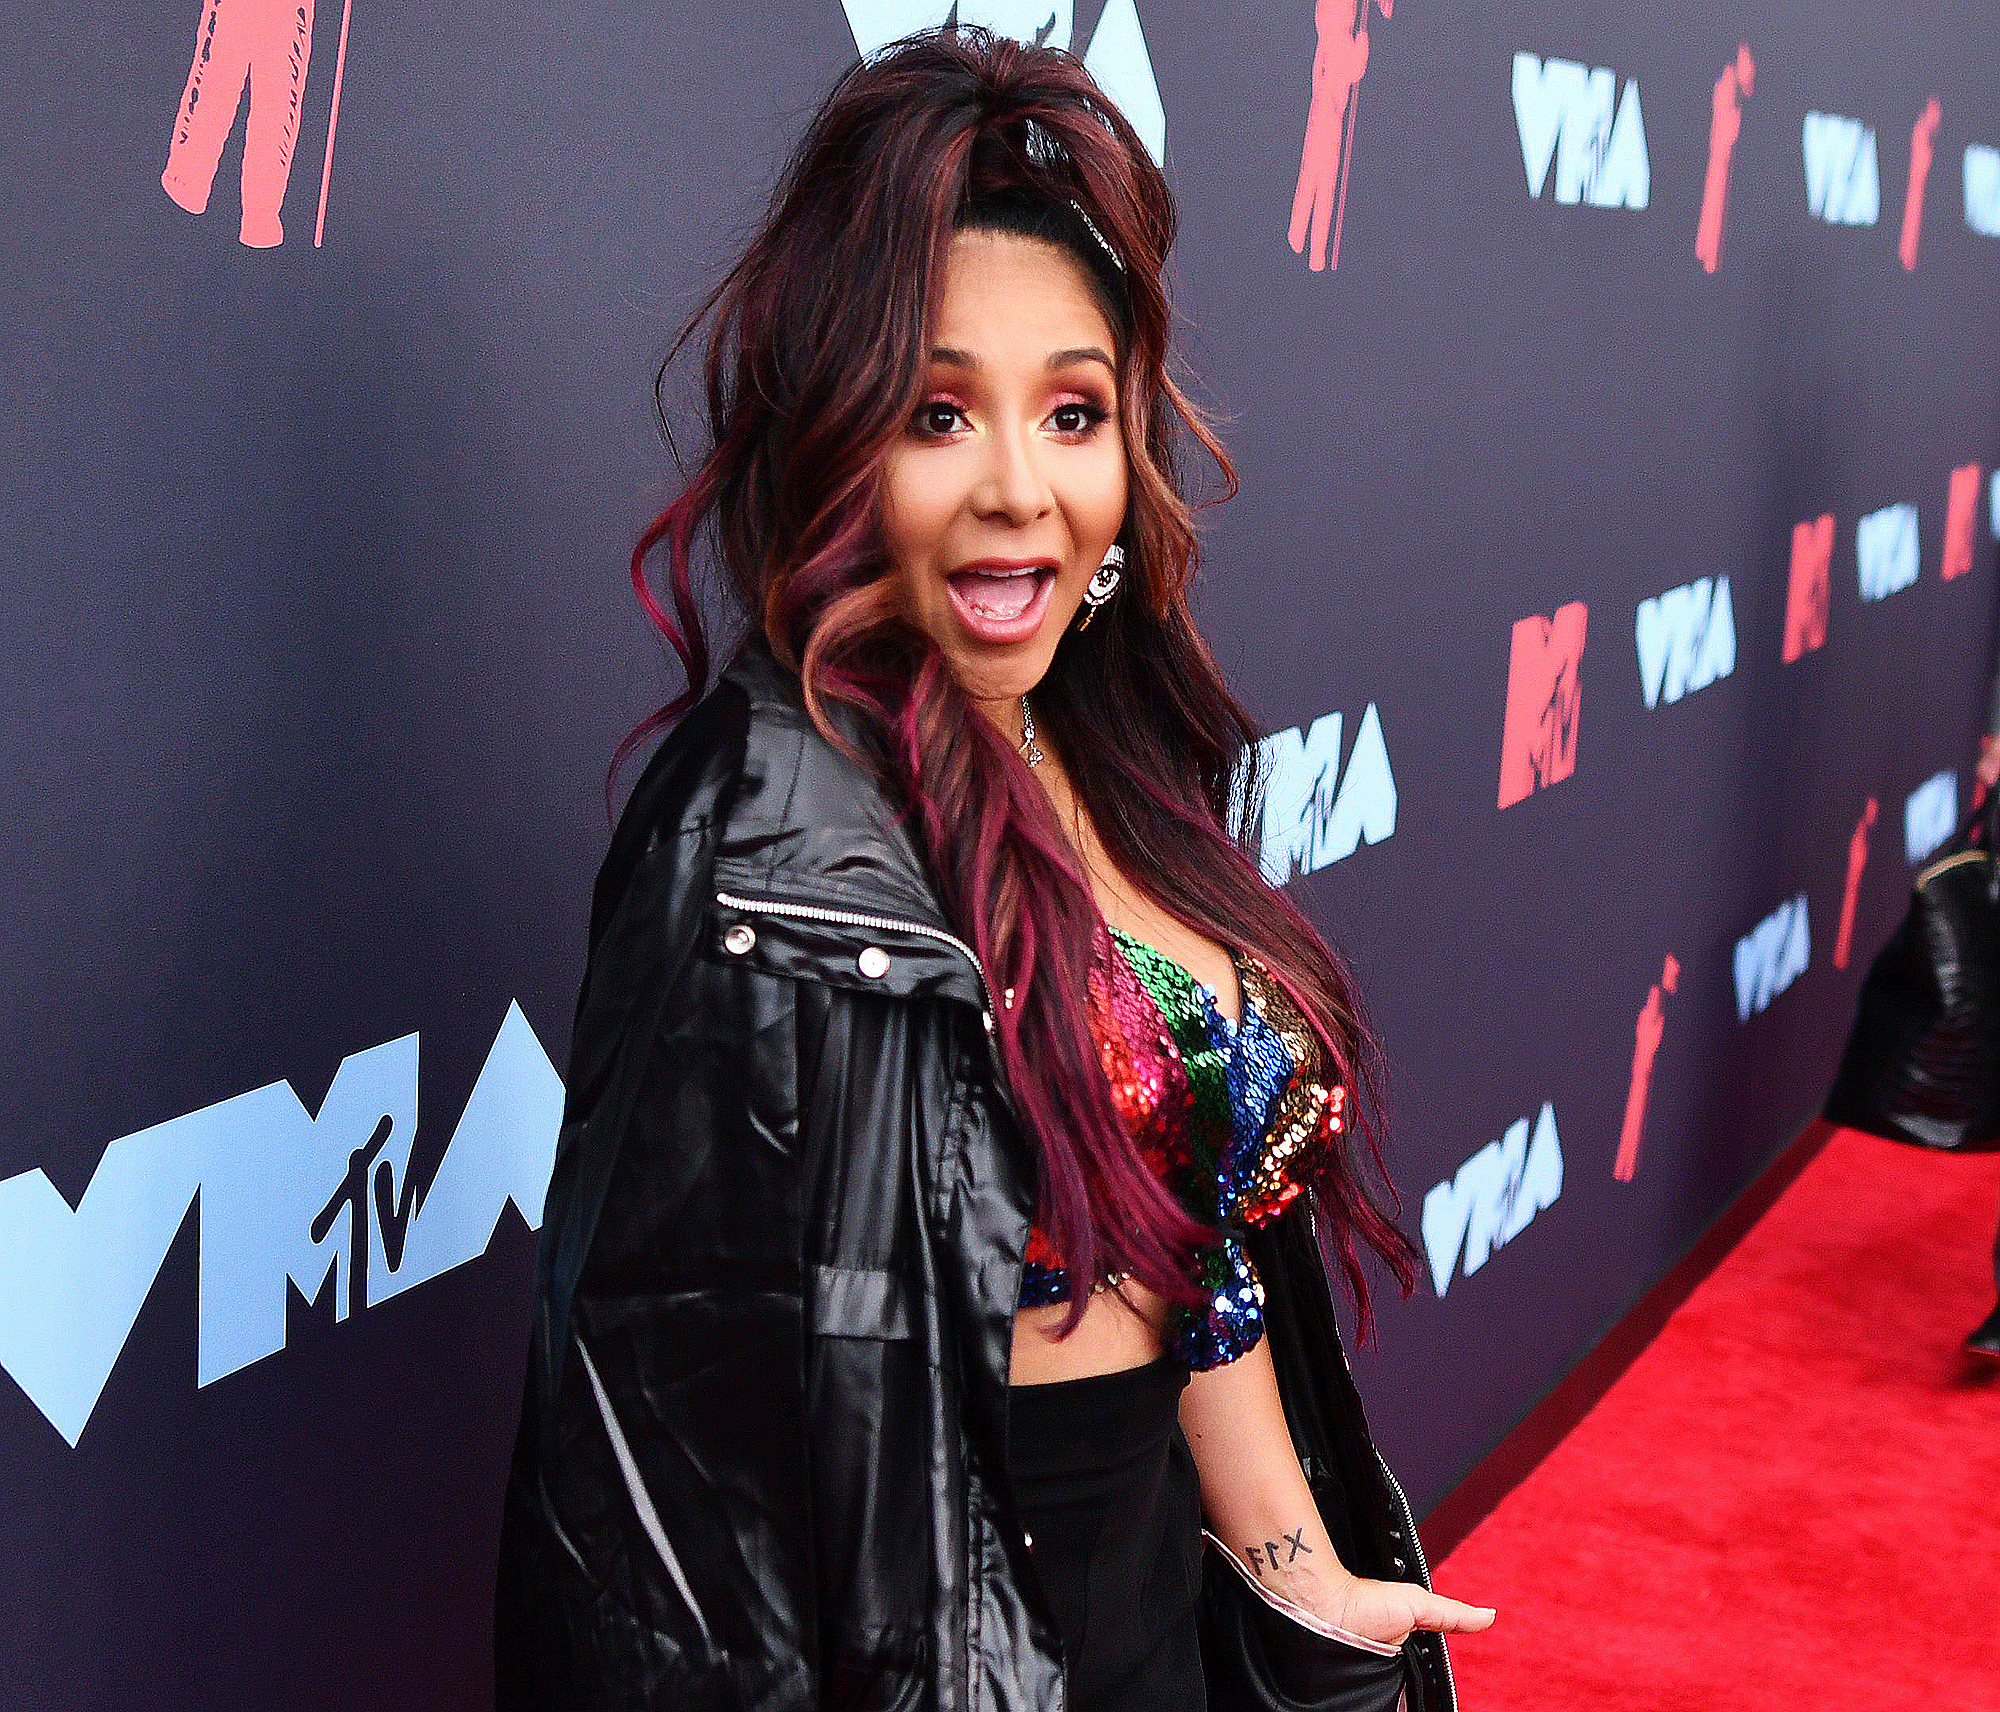 Nicole 'Snooki' Polizzi Explains All of Her Most Iconic 'Jersey Shore' Looks